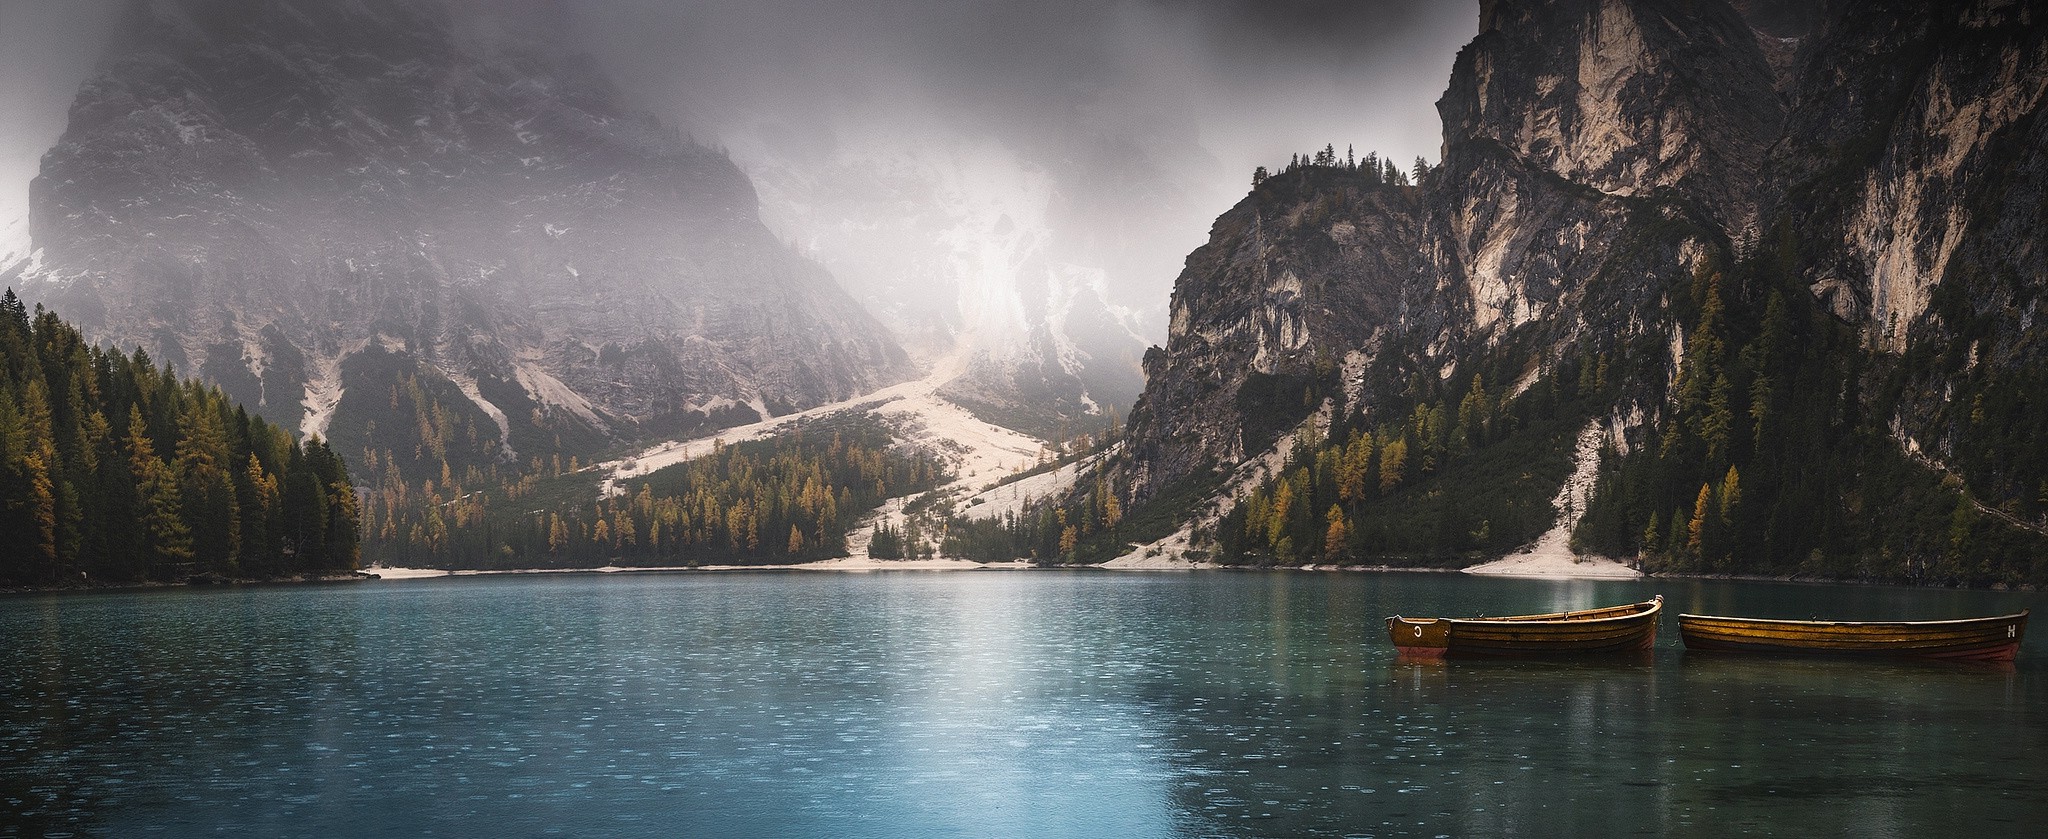 nature, Landscape, Panoramas, Lake, Fall, Mountain, Boat, Rain, Mist, Forest, Pine Trees, Alps Wallpaper